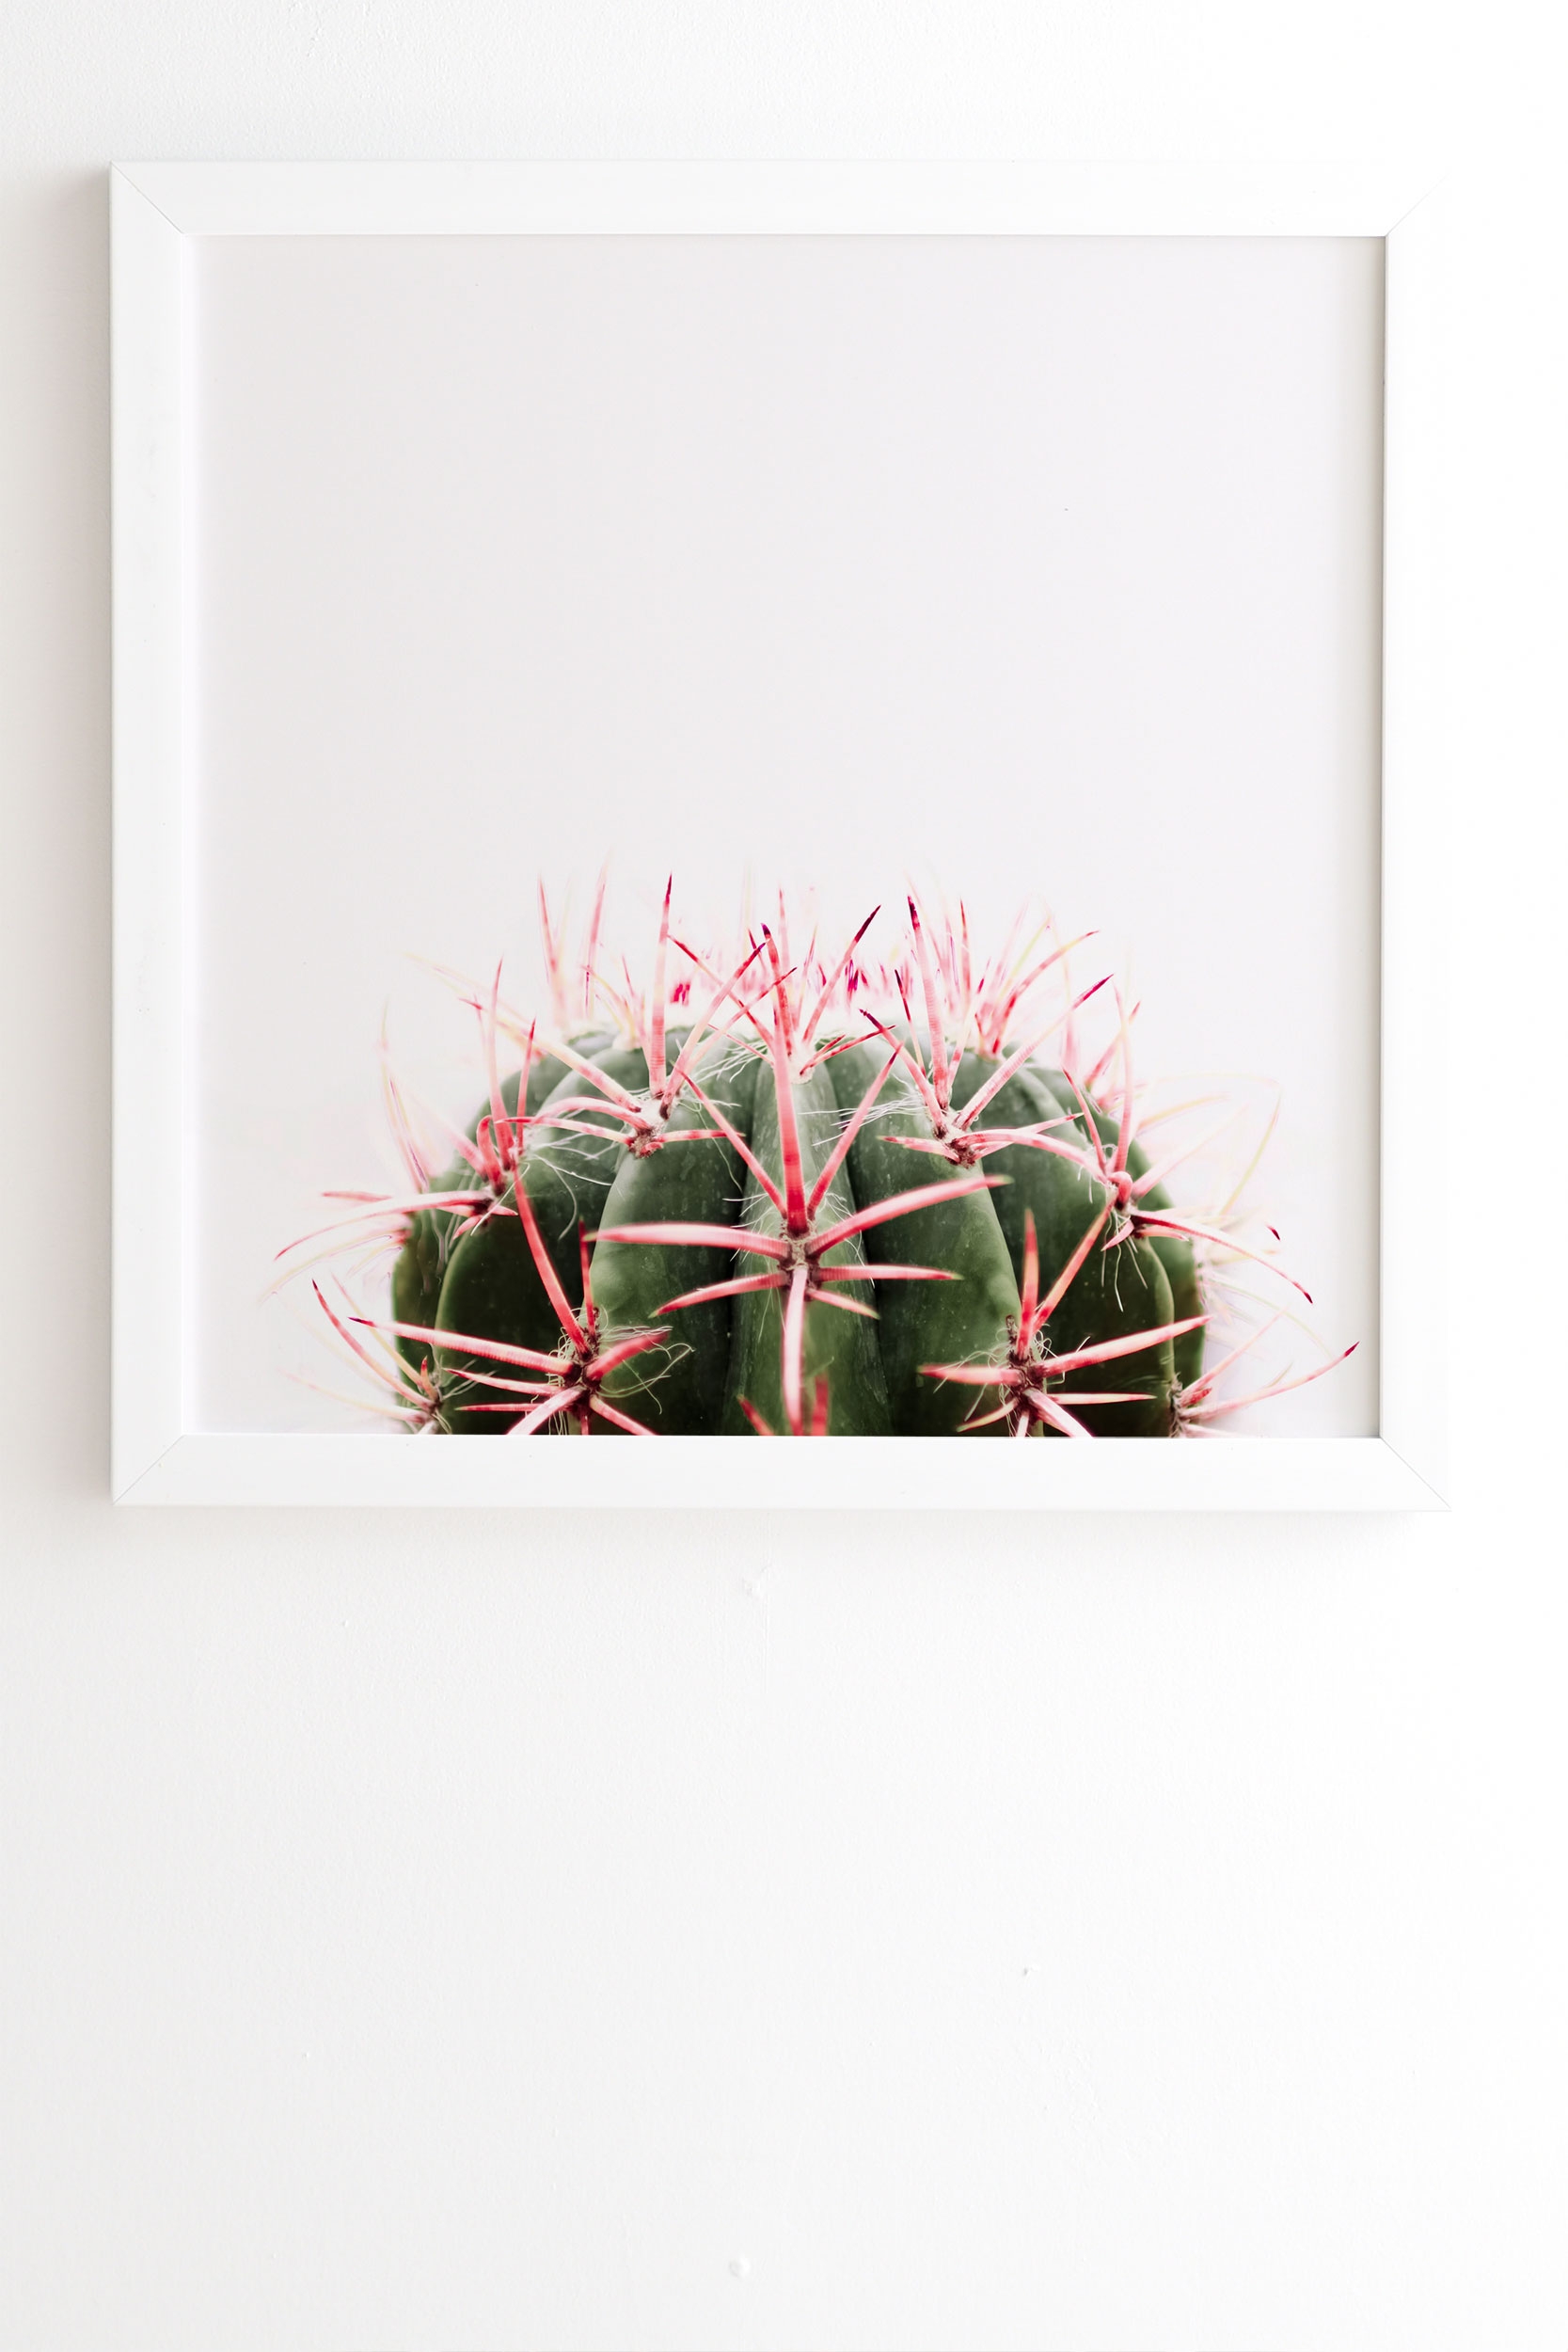 Cactus Red by Ingrid Beddoes - Framed Wall Art Basic White 11" x 13" - Image 1